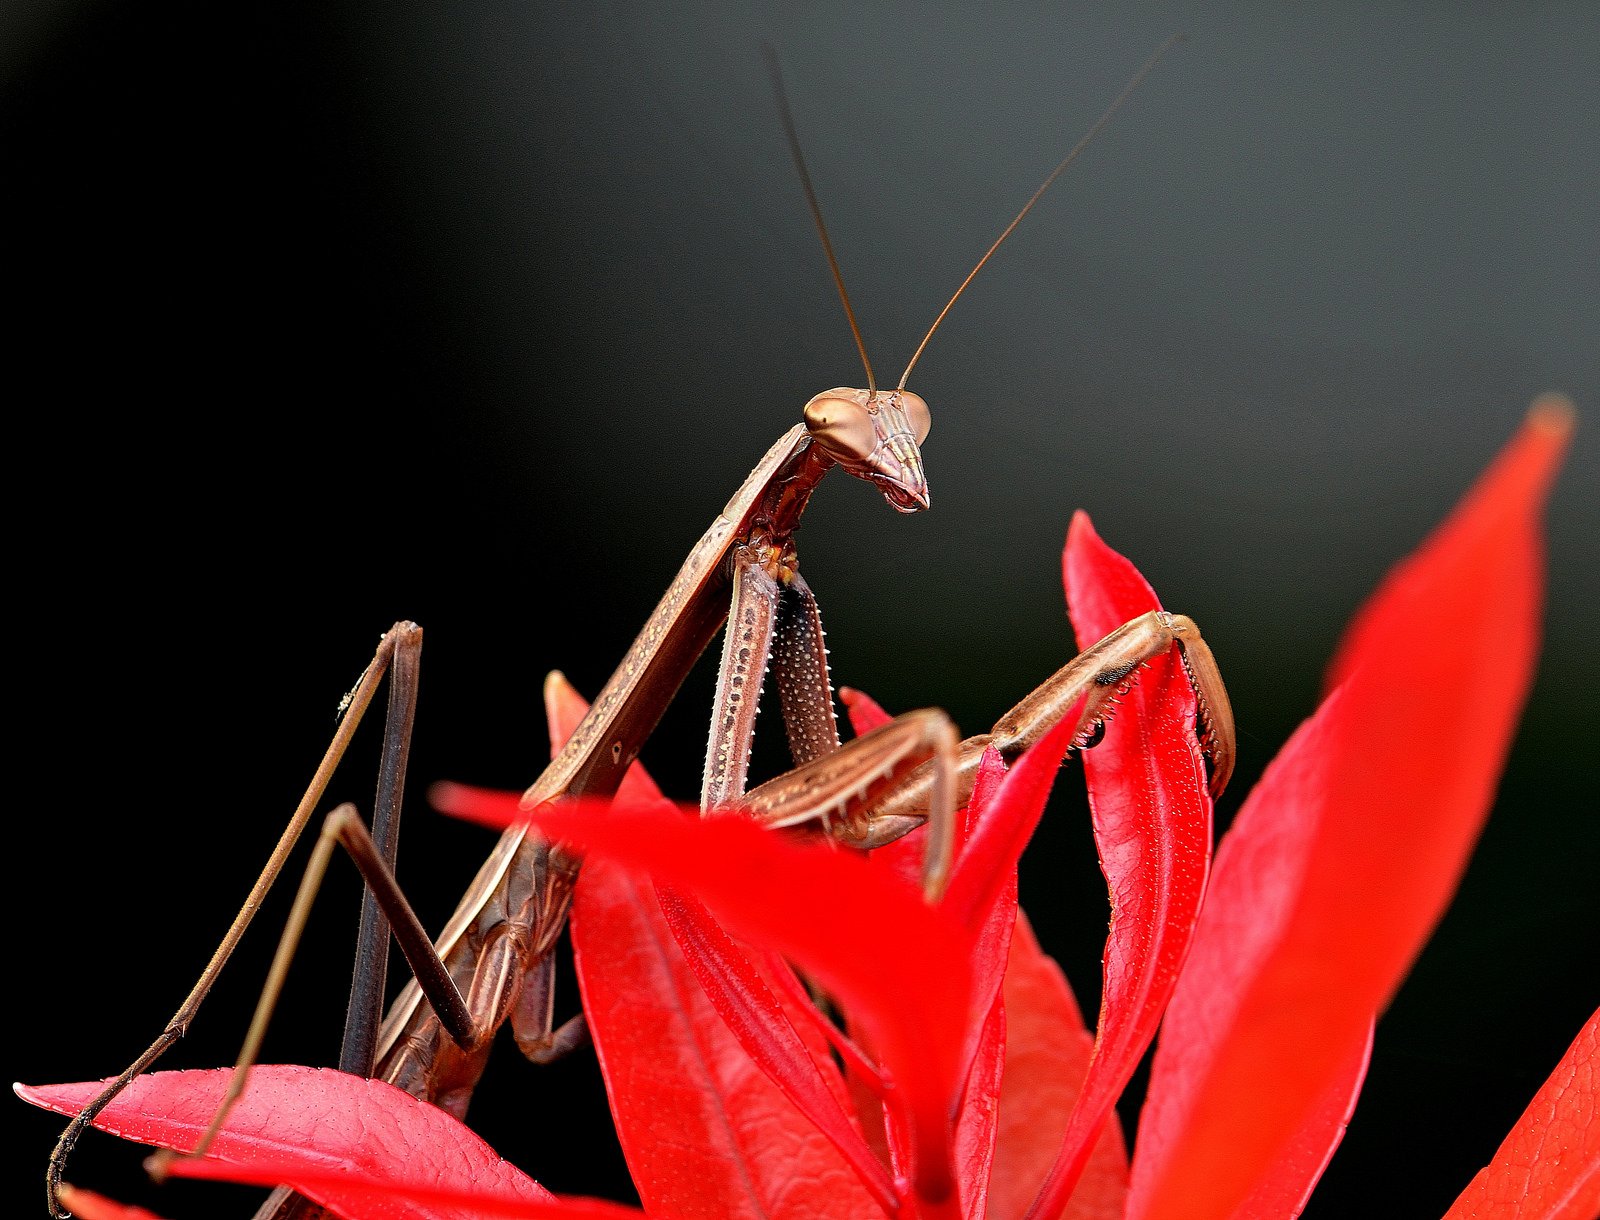 insects, Mantis, Mante, Religieuse, Nature, Macro, Closeup, Zoom Wallpaper